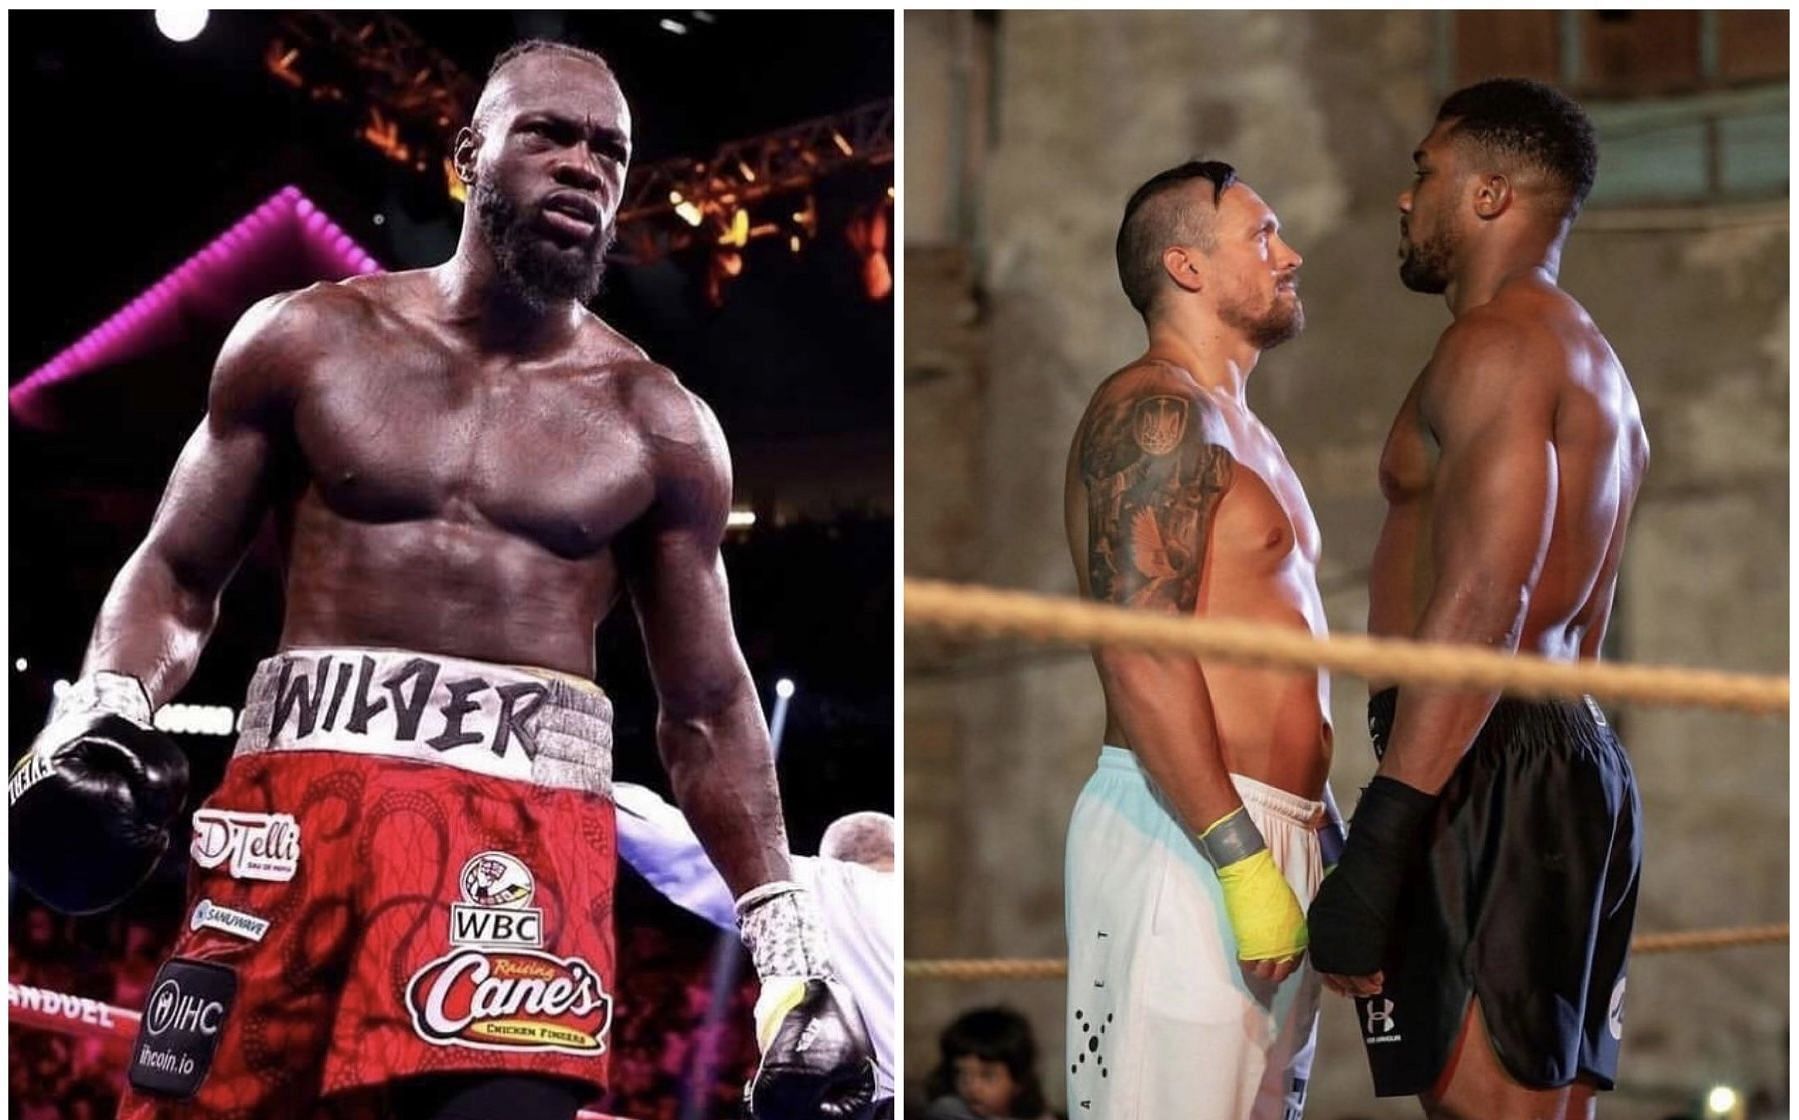 Deontay Wilder (left), Oleksandr Usyk (center), and Anthony Joshua (right) [Images via @usykaa and @bronzebomber]